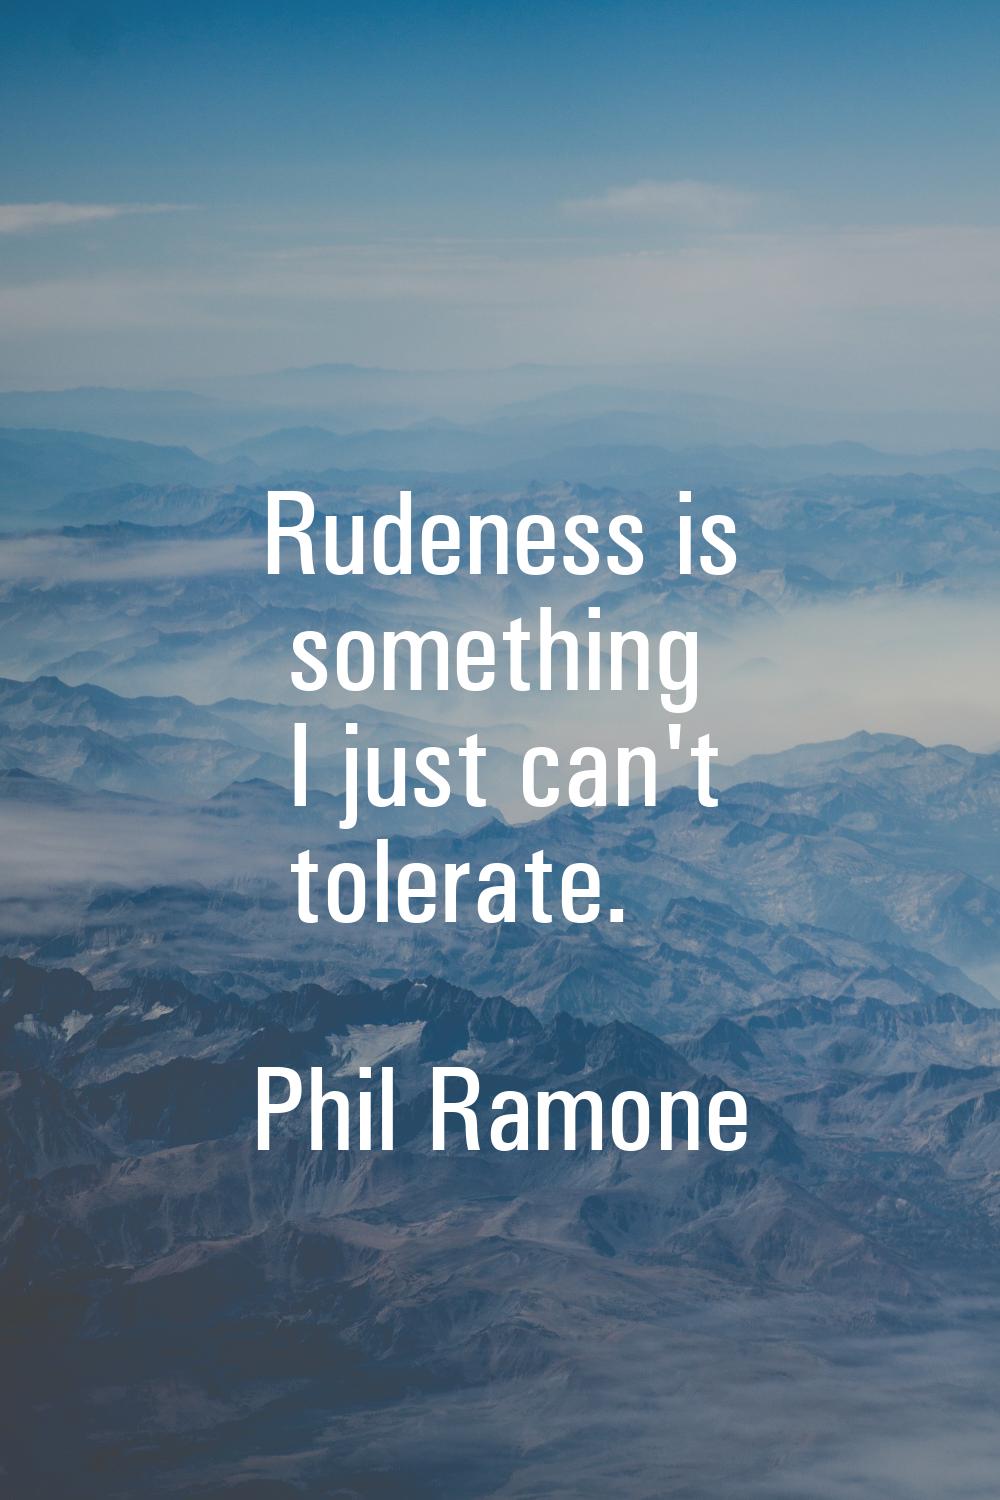 Rudeness is something I just can't tolerate.